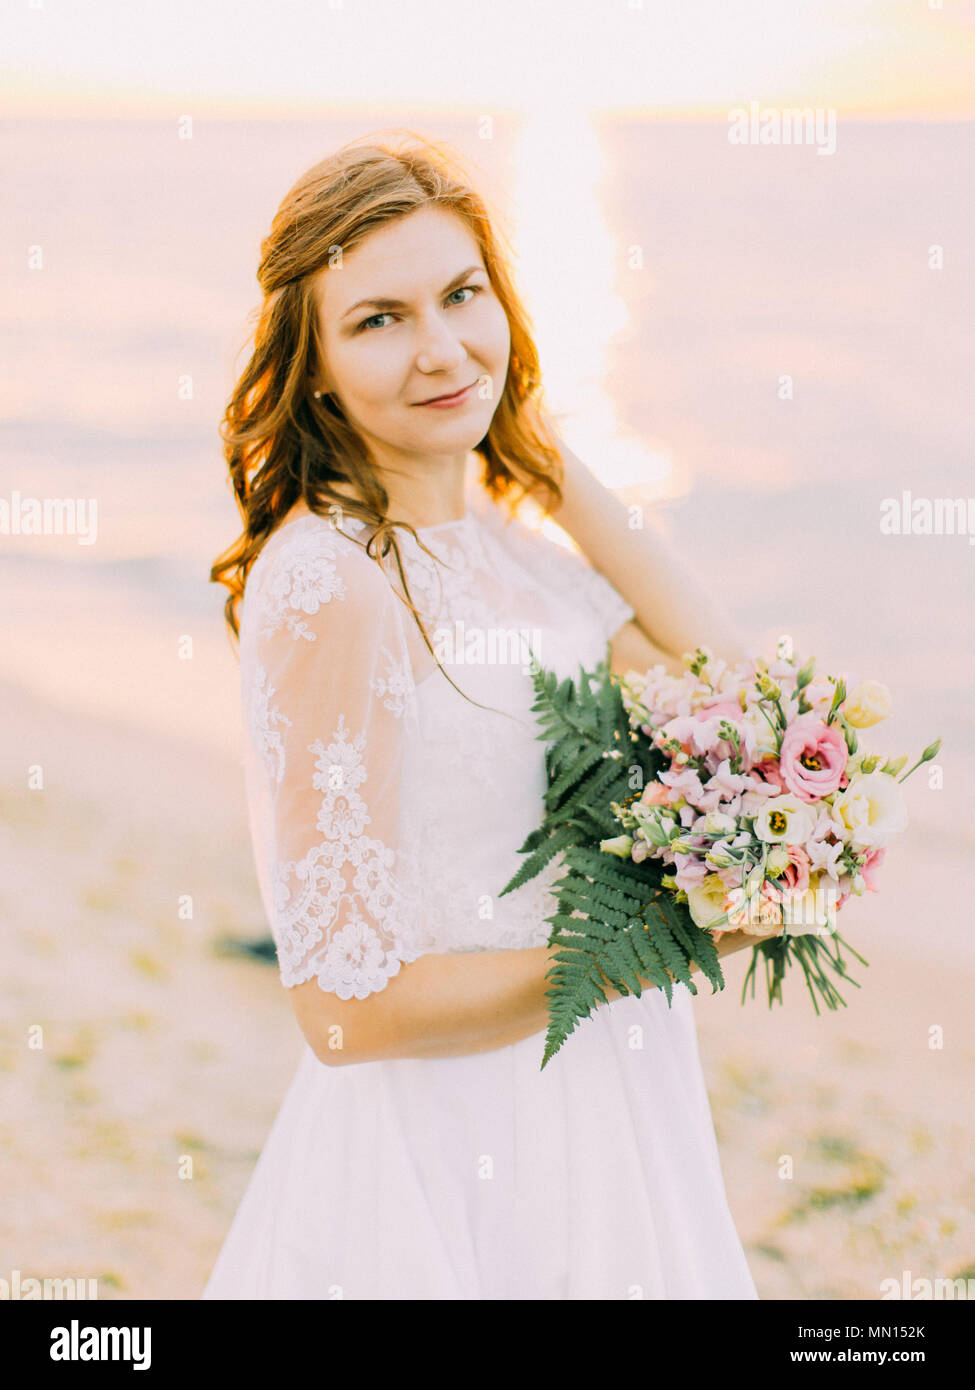 The close-up portrait of the bride holding the bouquet. The sunset composition. Stock Photo